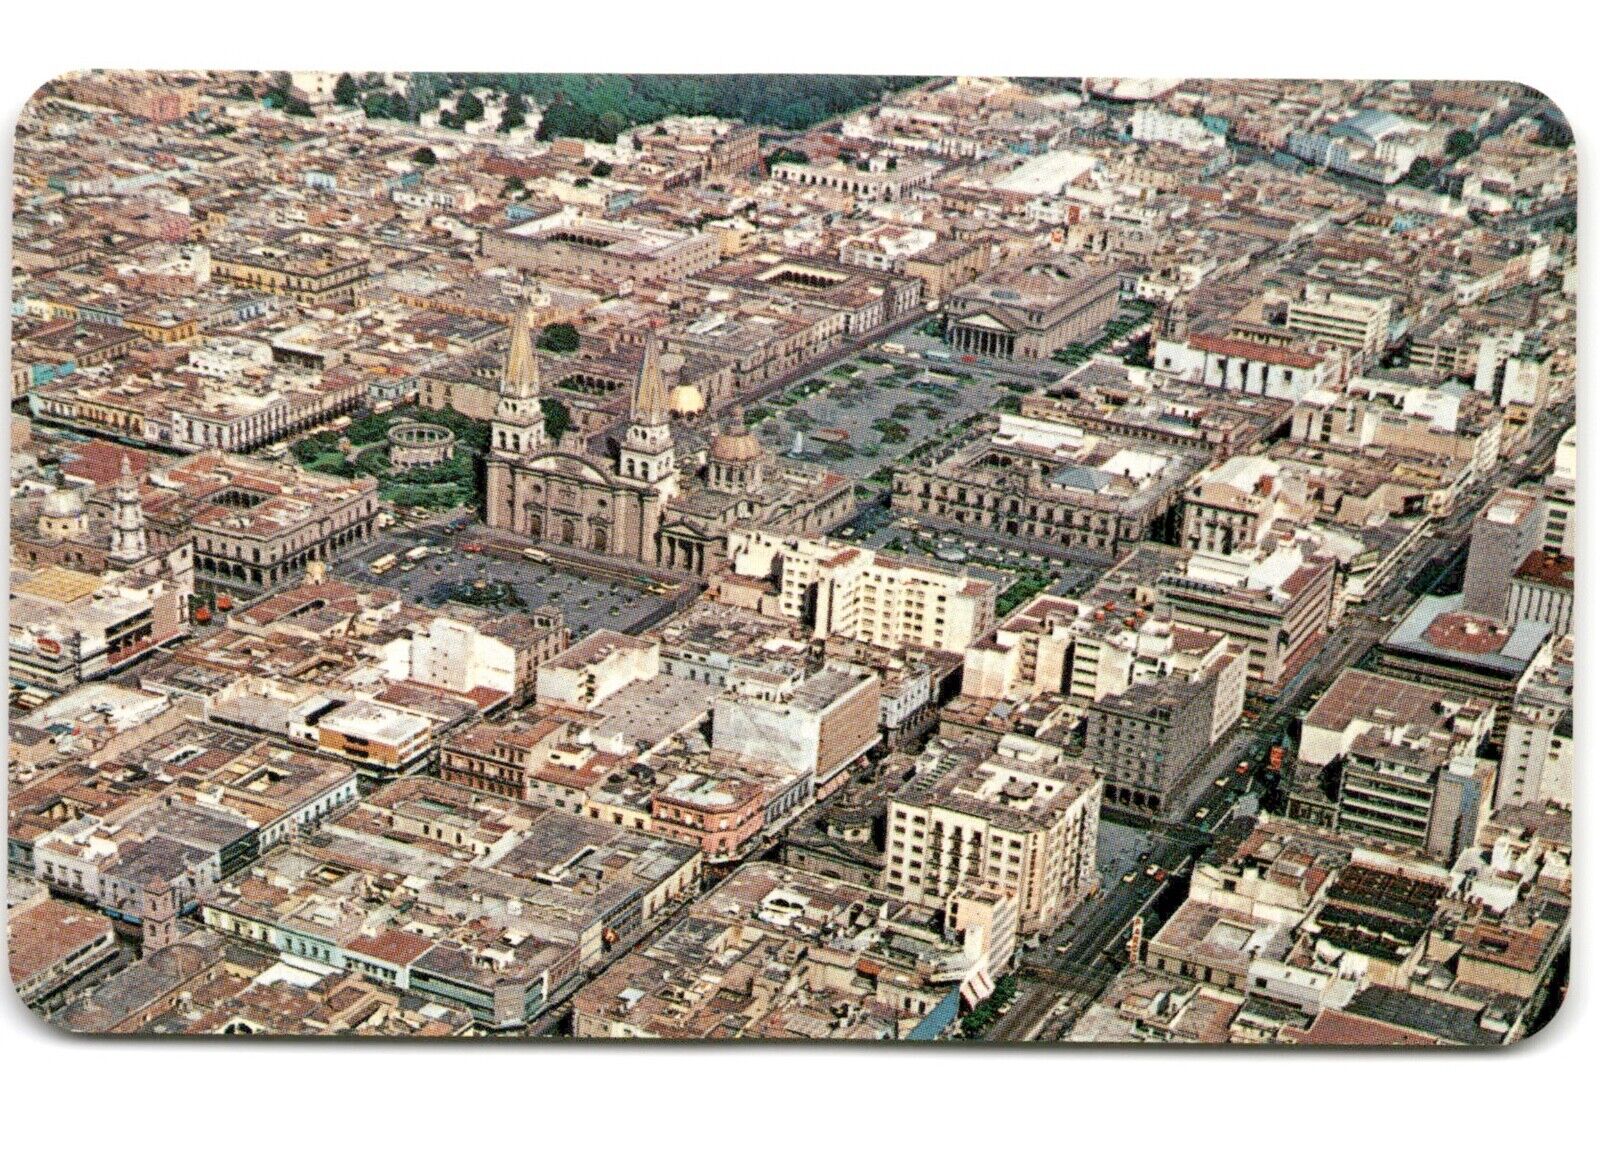 Air View of the center of Guadalajara, Mexico Vintage Chrome Postcard